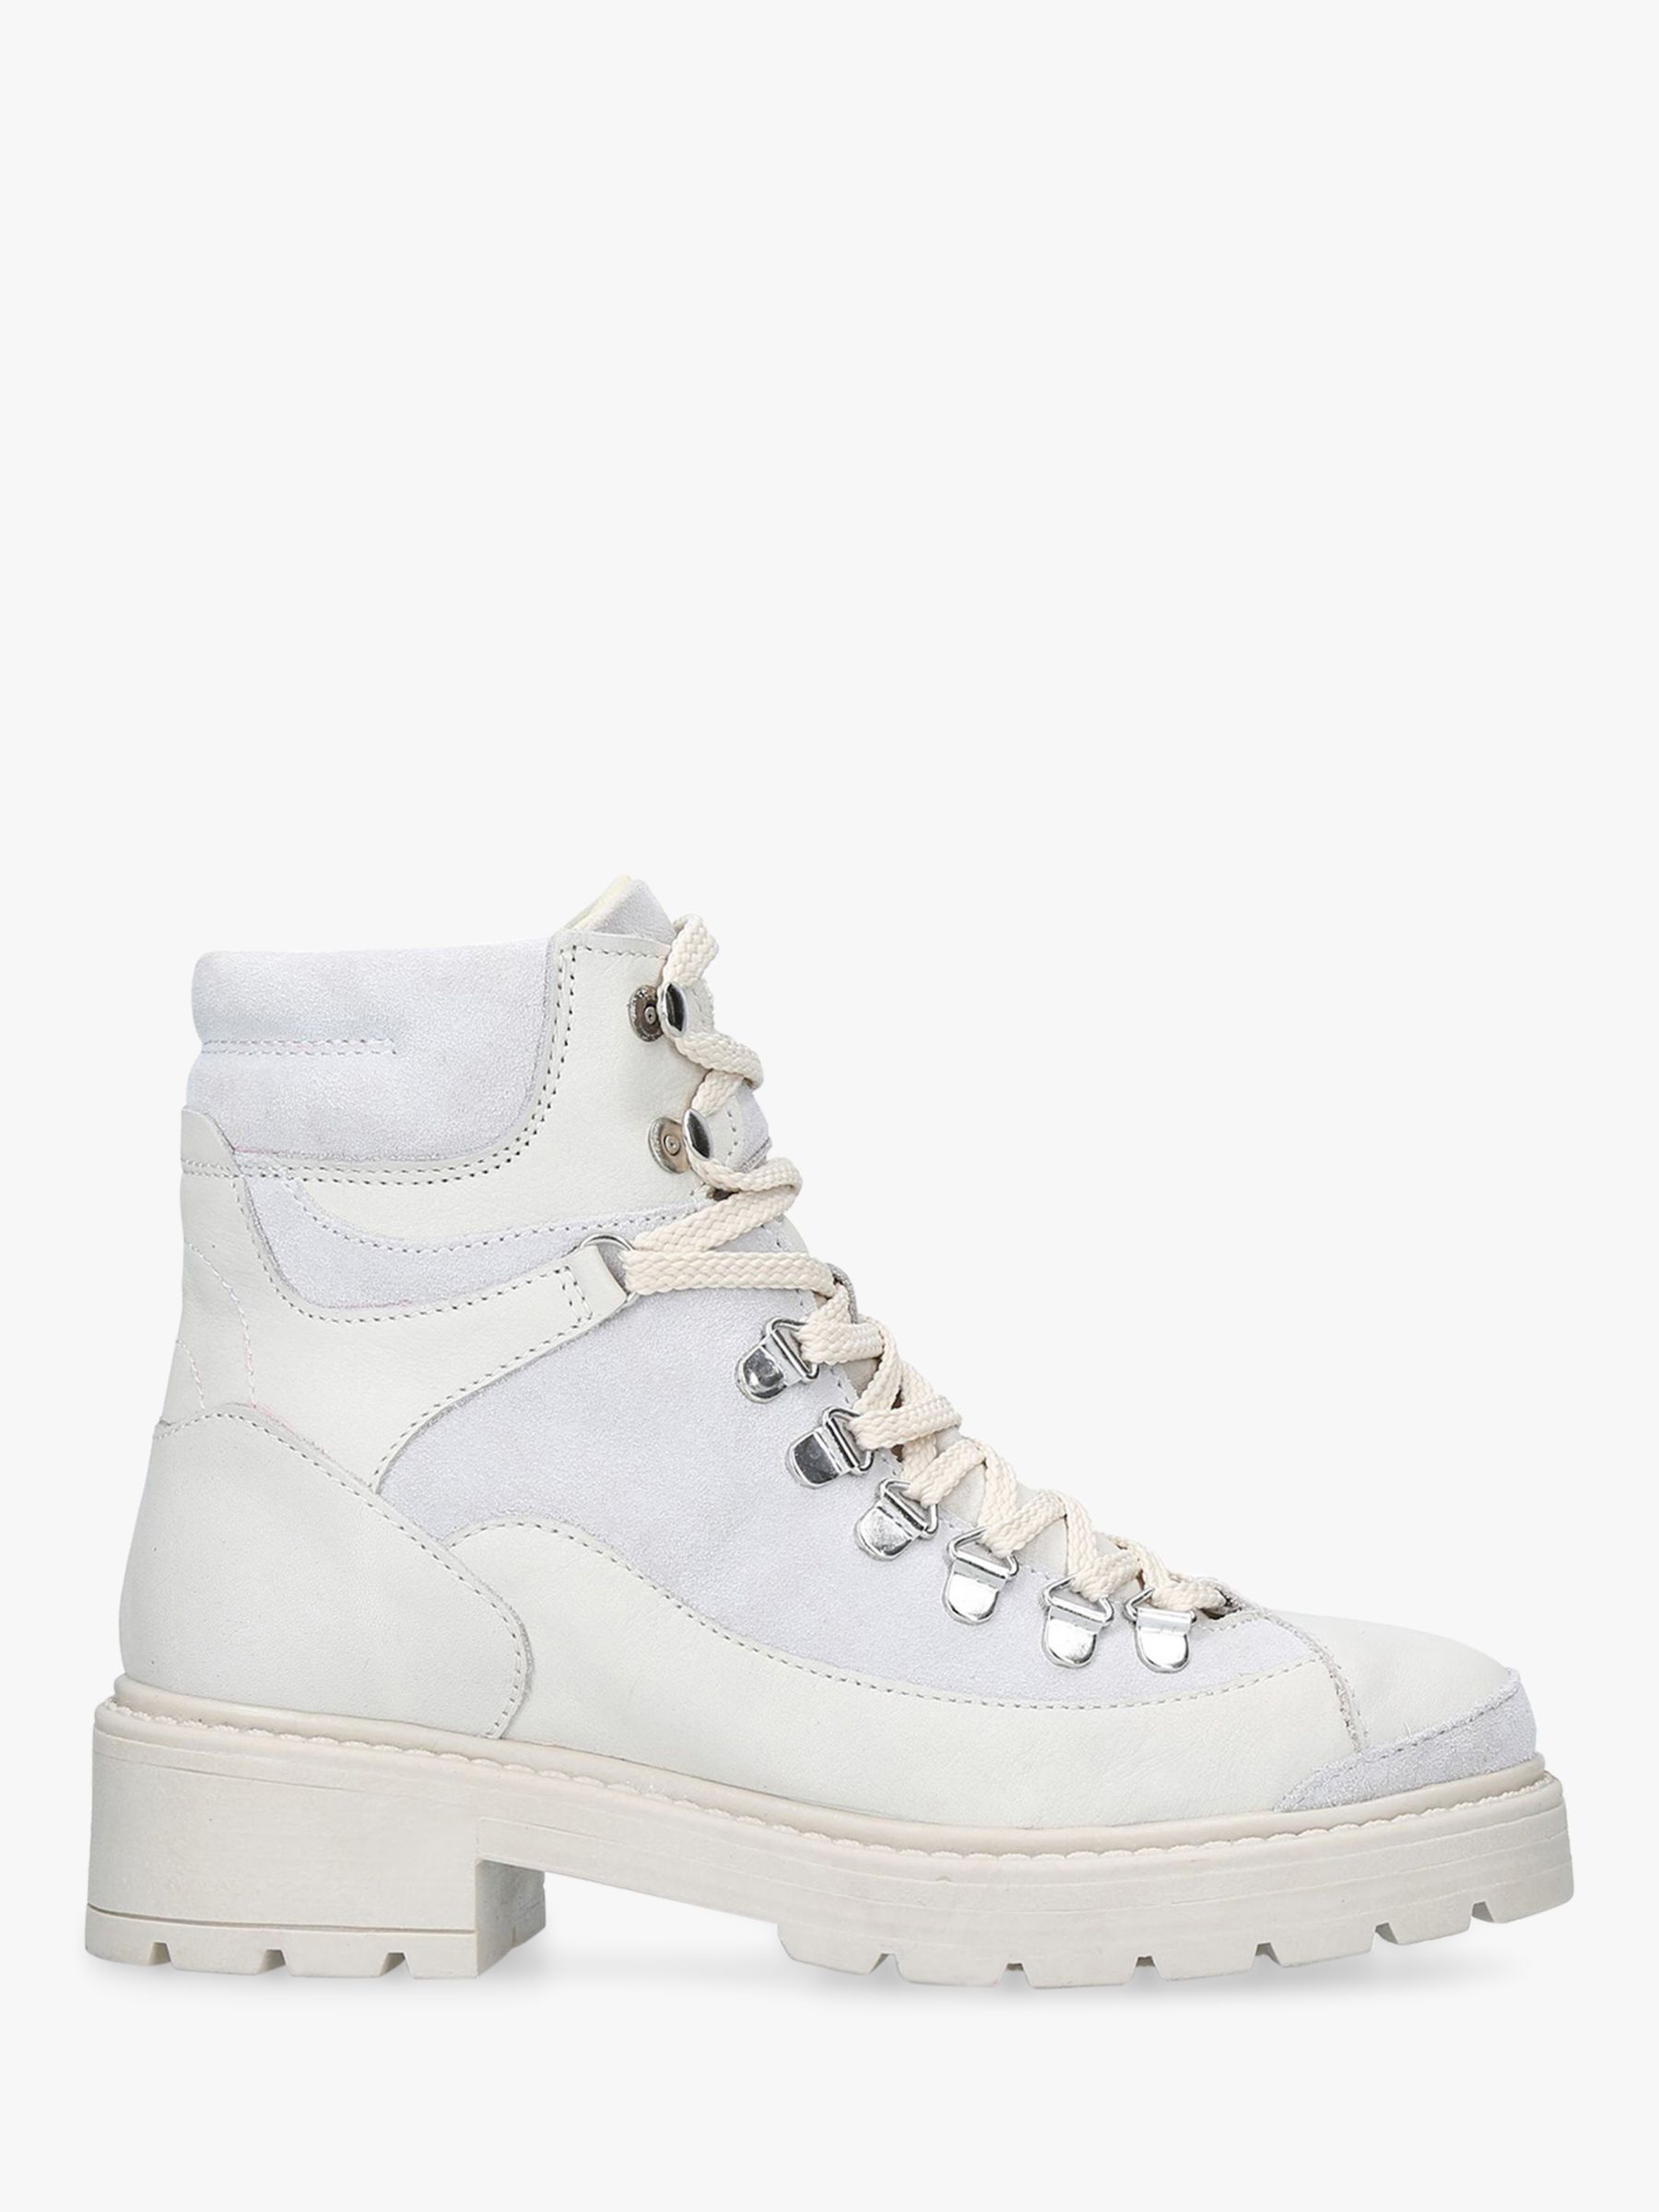 Carvela Shake Leather Lace Up Ankle Boots, White at John Lewis & Partners